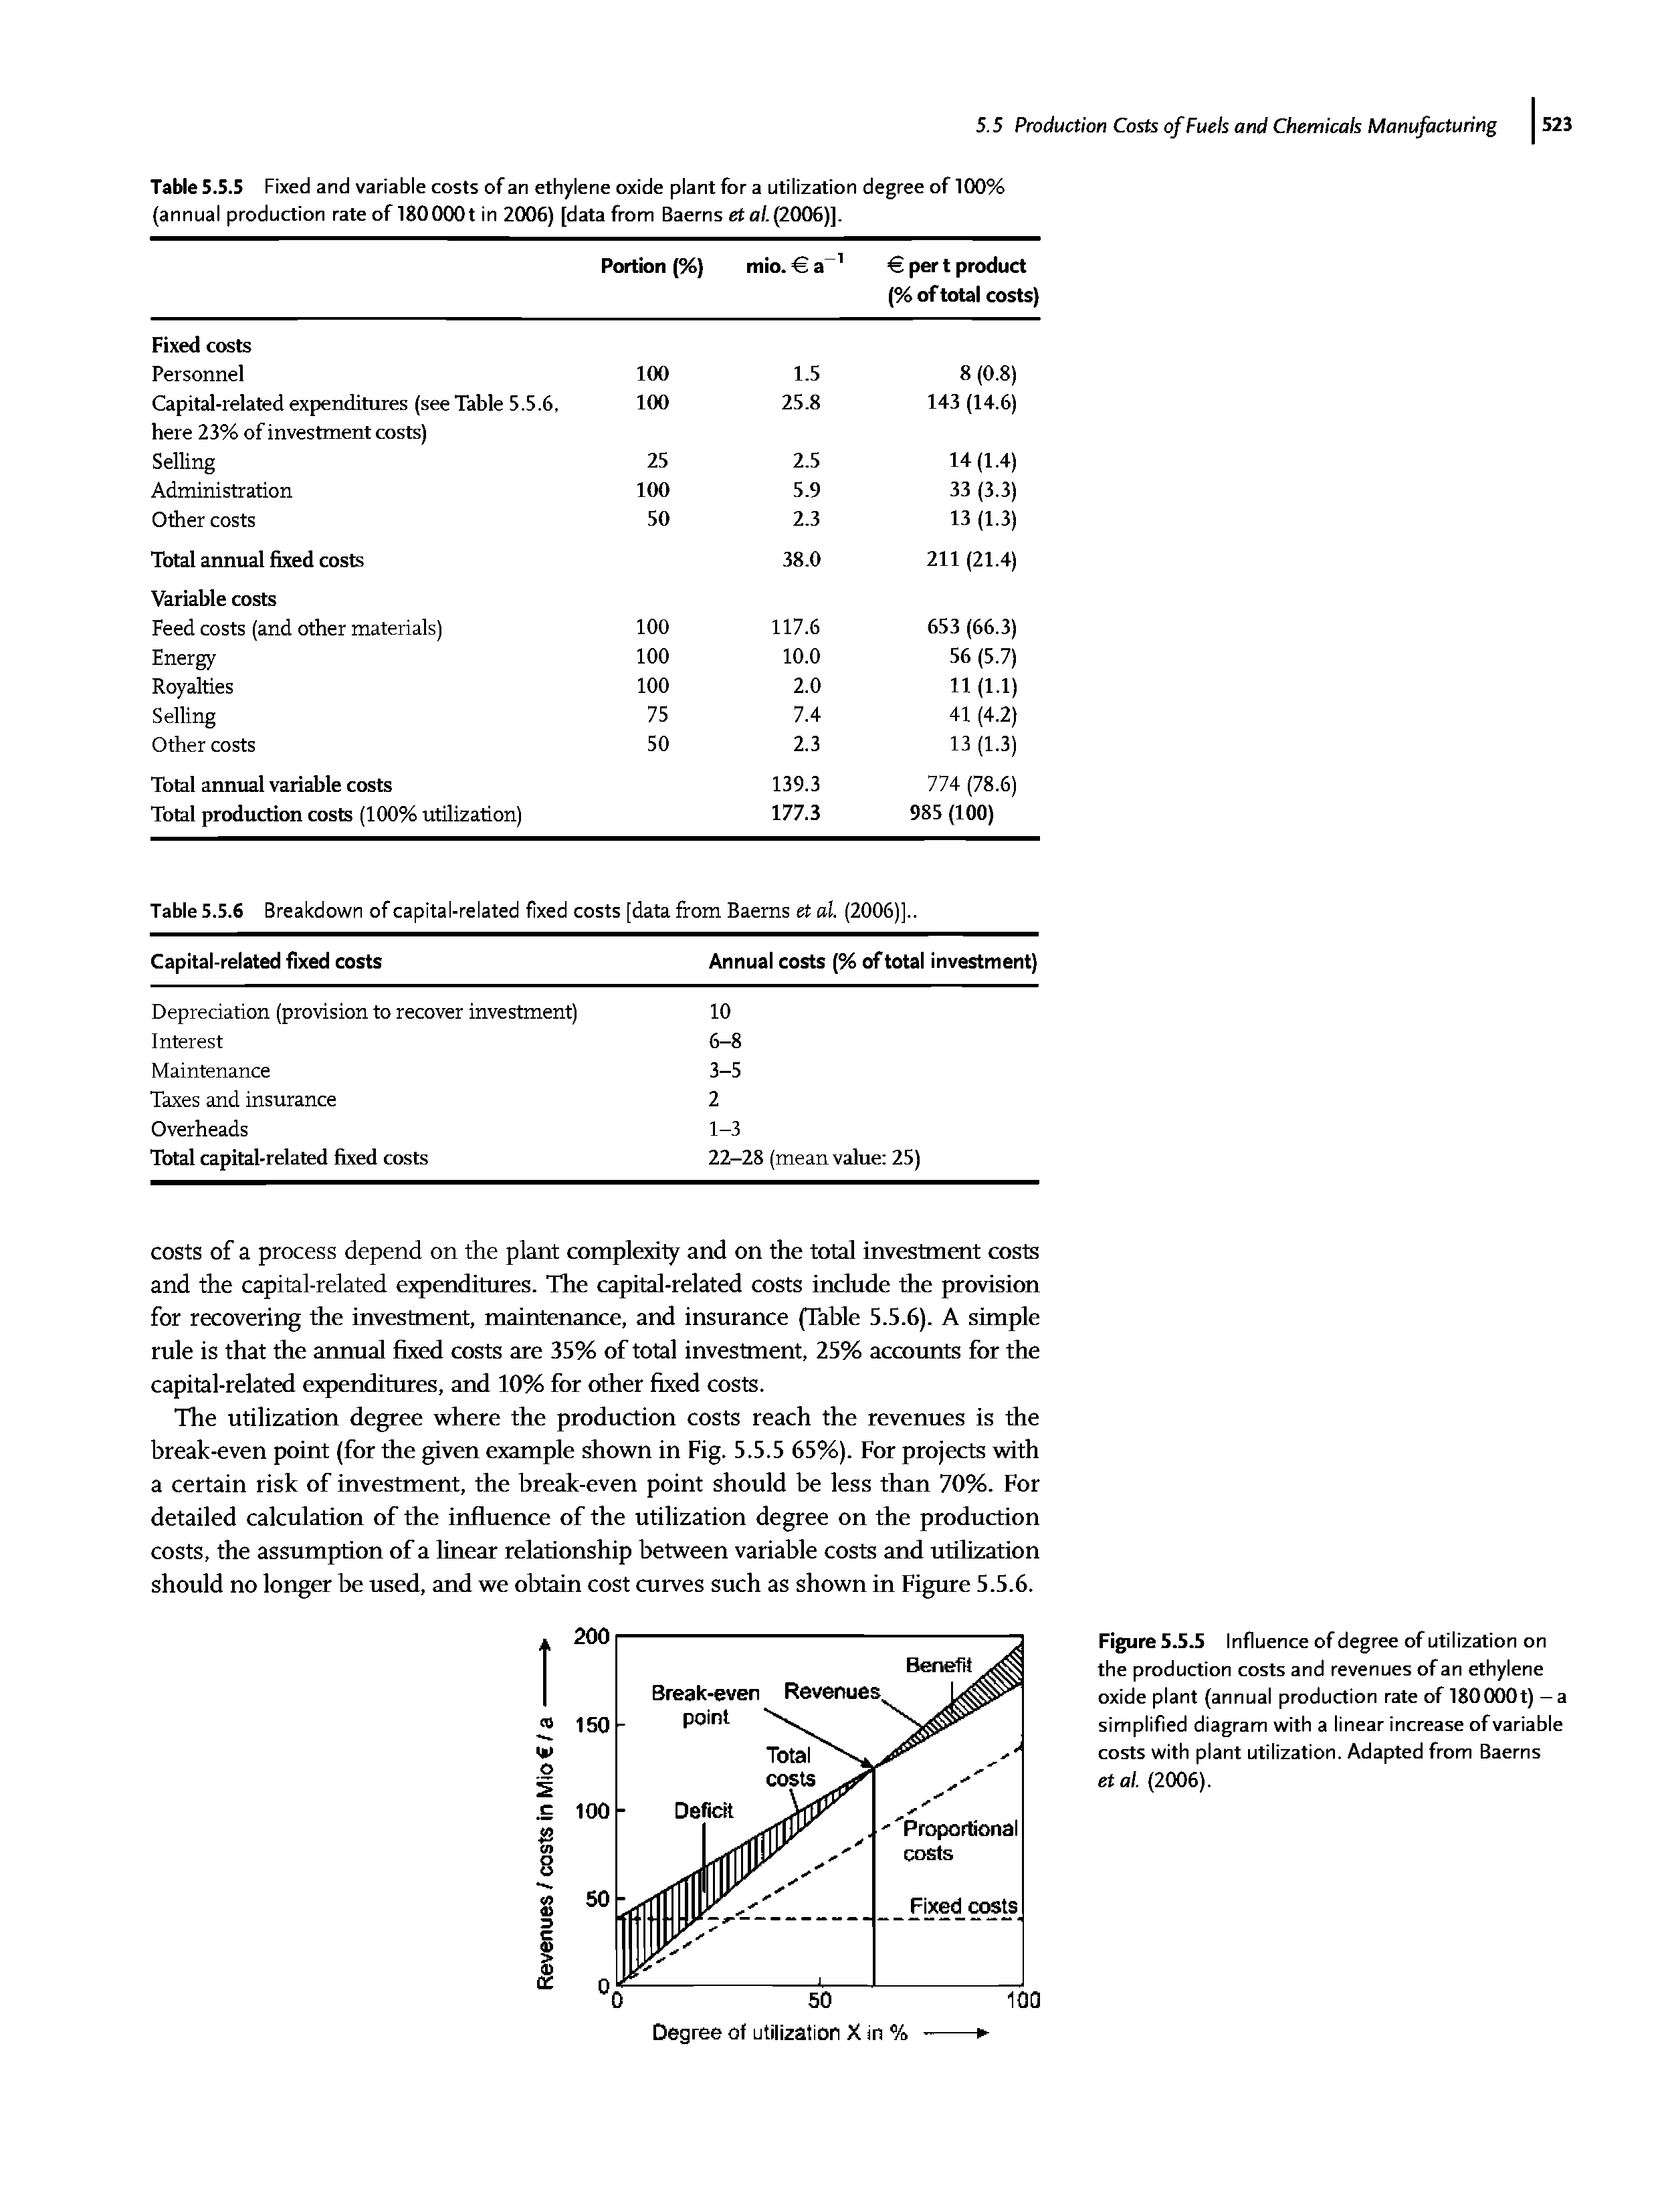 Table 5.5.5 Fixed and variable costs of an ethylene oxide plant for a utilization degree of 100% (annual production rate of 1800001 in 2006) [data from Baerns et o/.(2006)].